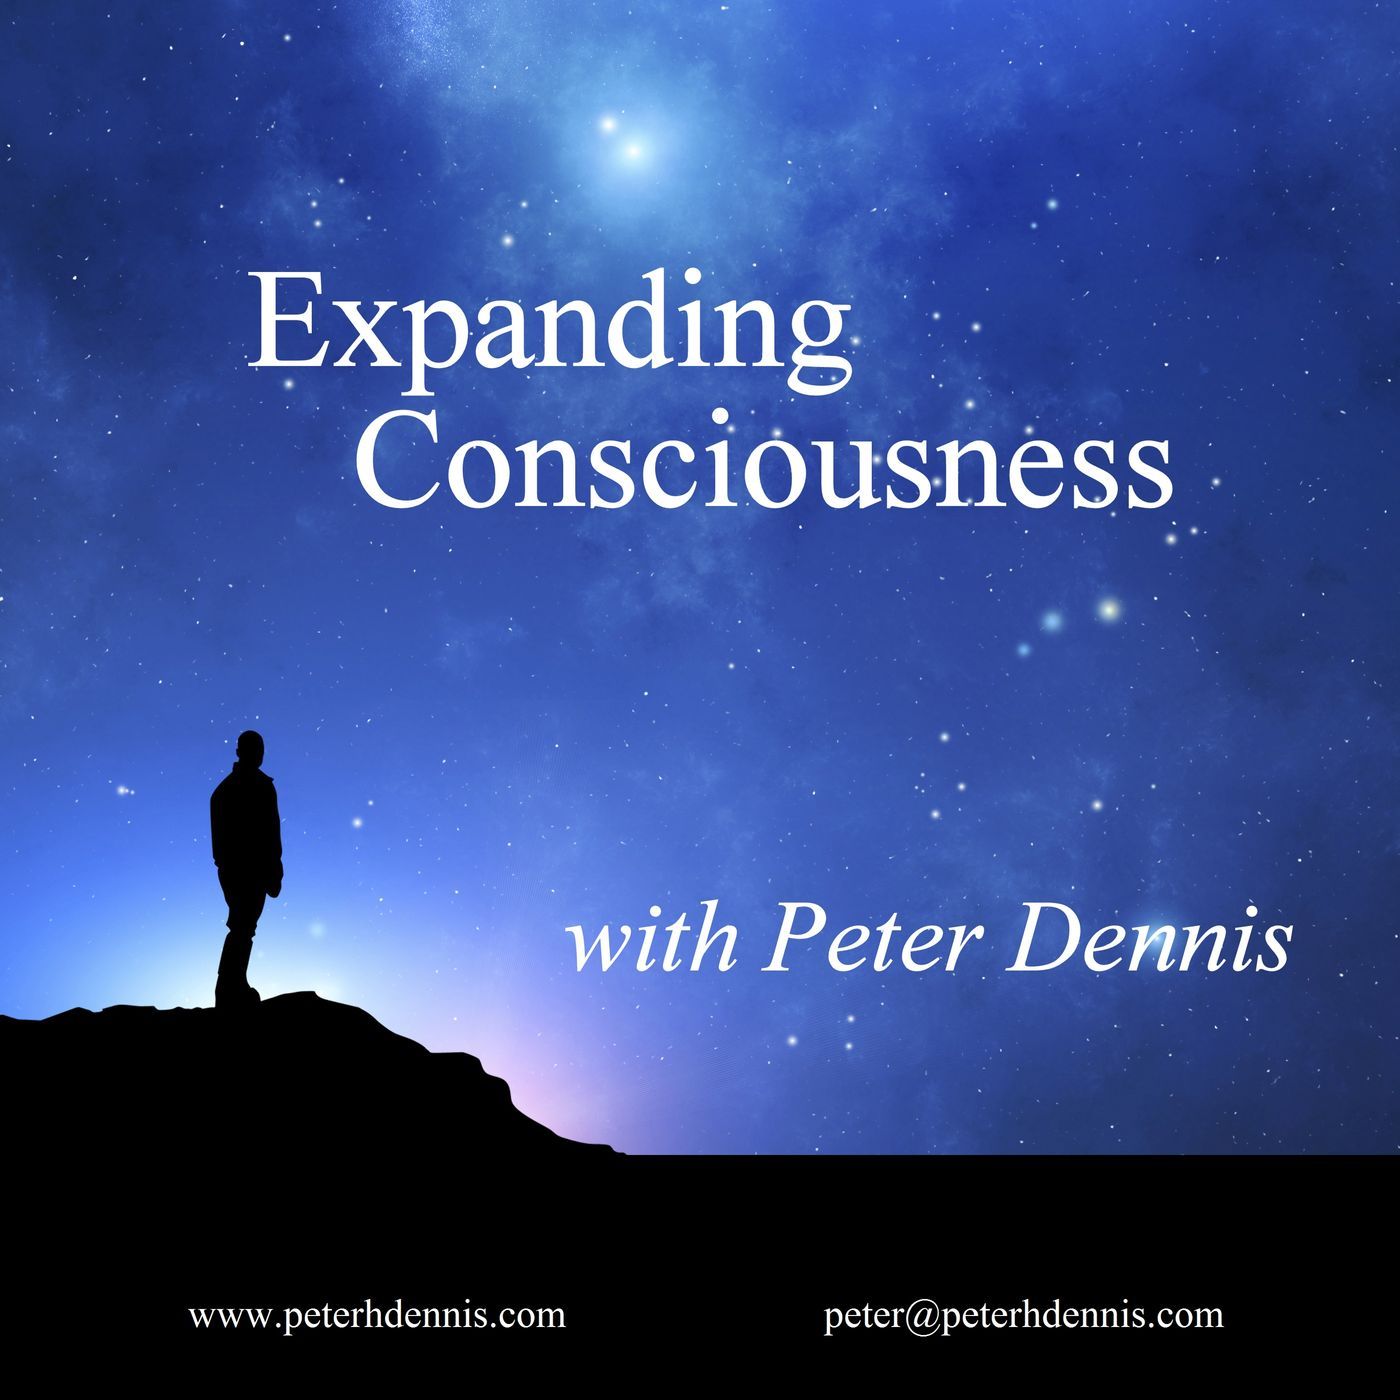 Expanding Consciousness in the Community